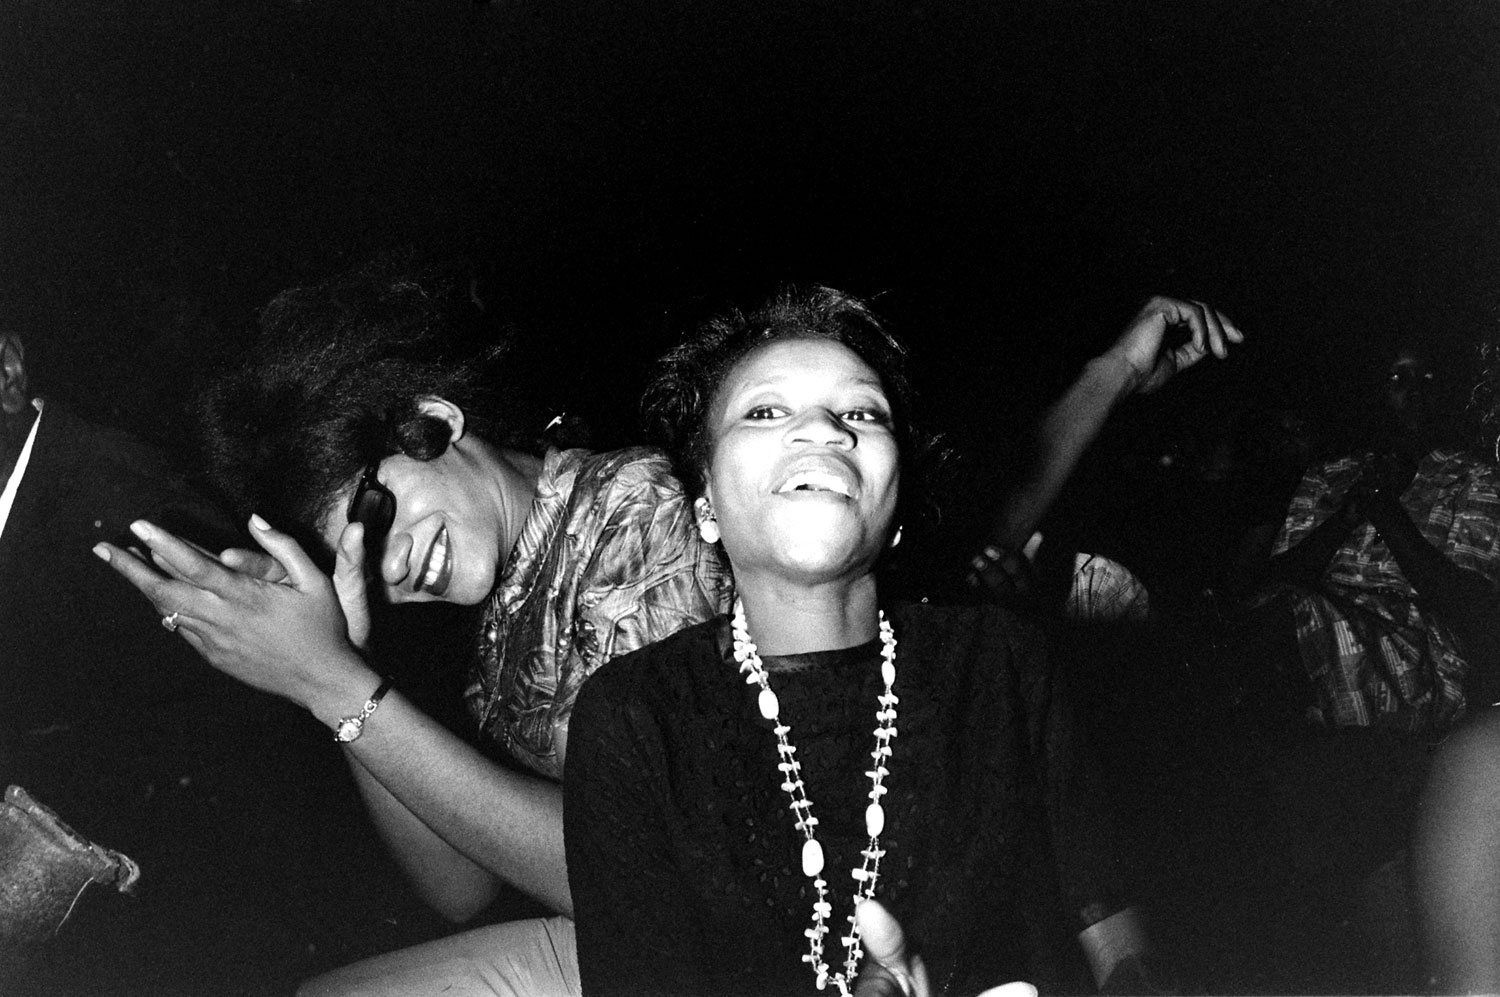 The crowd reacts during the Salute to Freedom benefit concert in Birmingham, Ala., August 5, 1963.